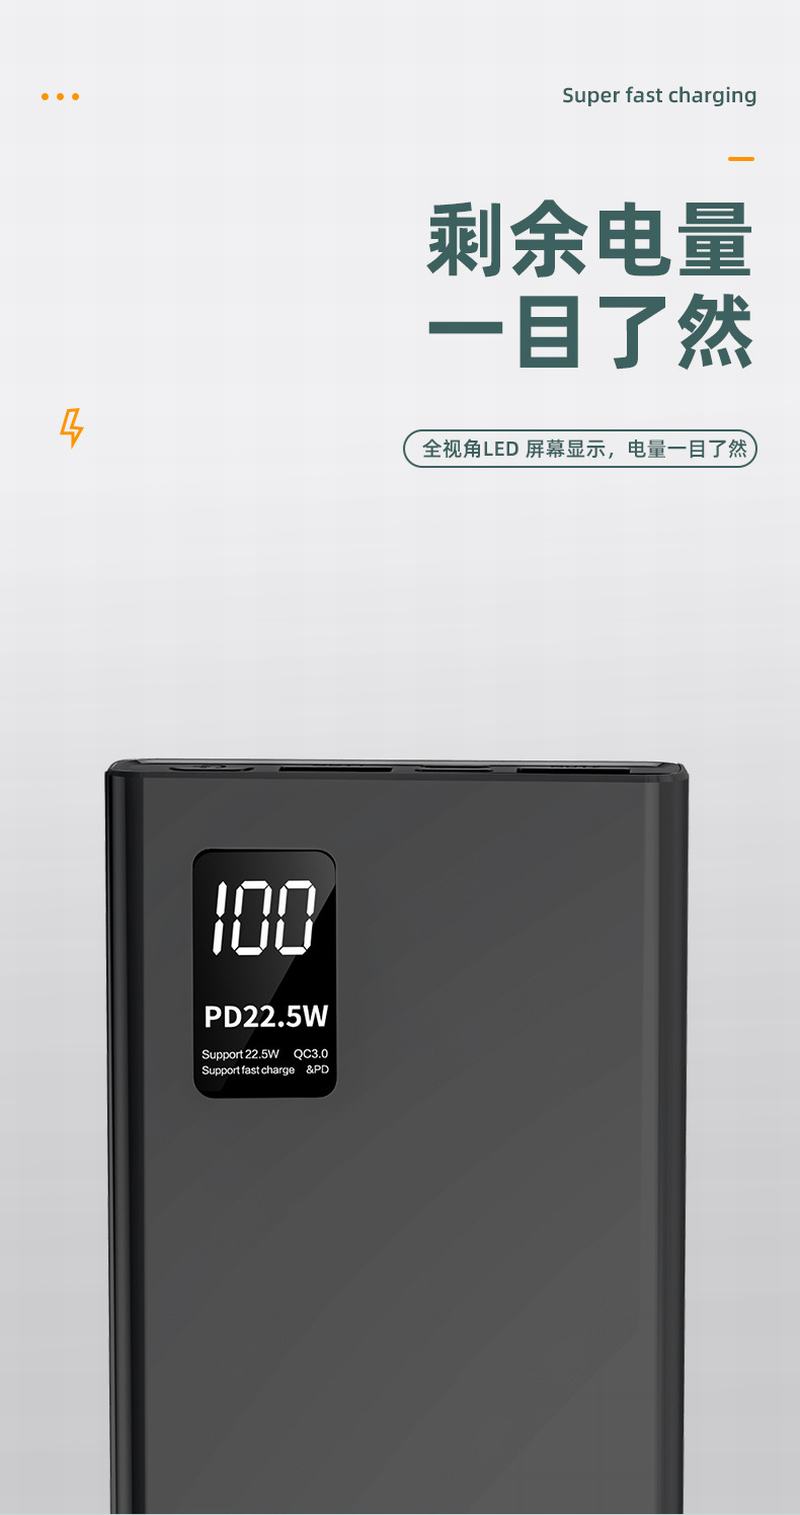 22.5w super flash charger high capacity PD20w bidirectional fast charging mobile power supply